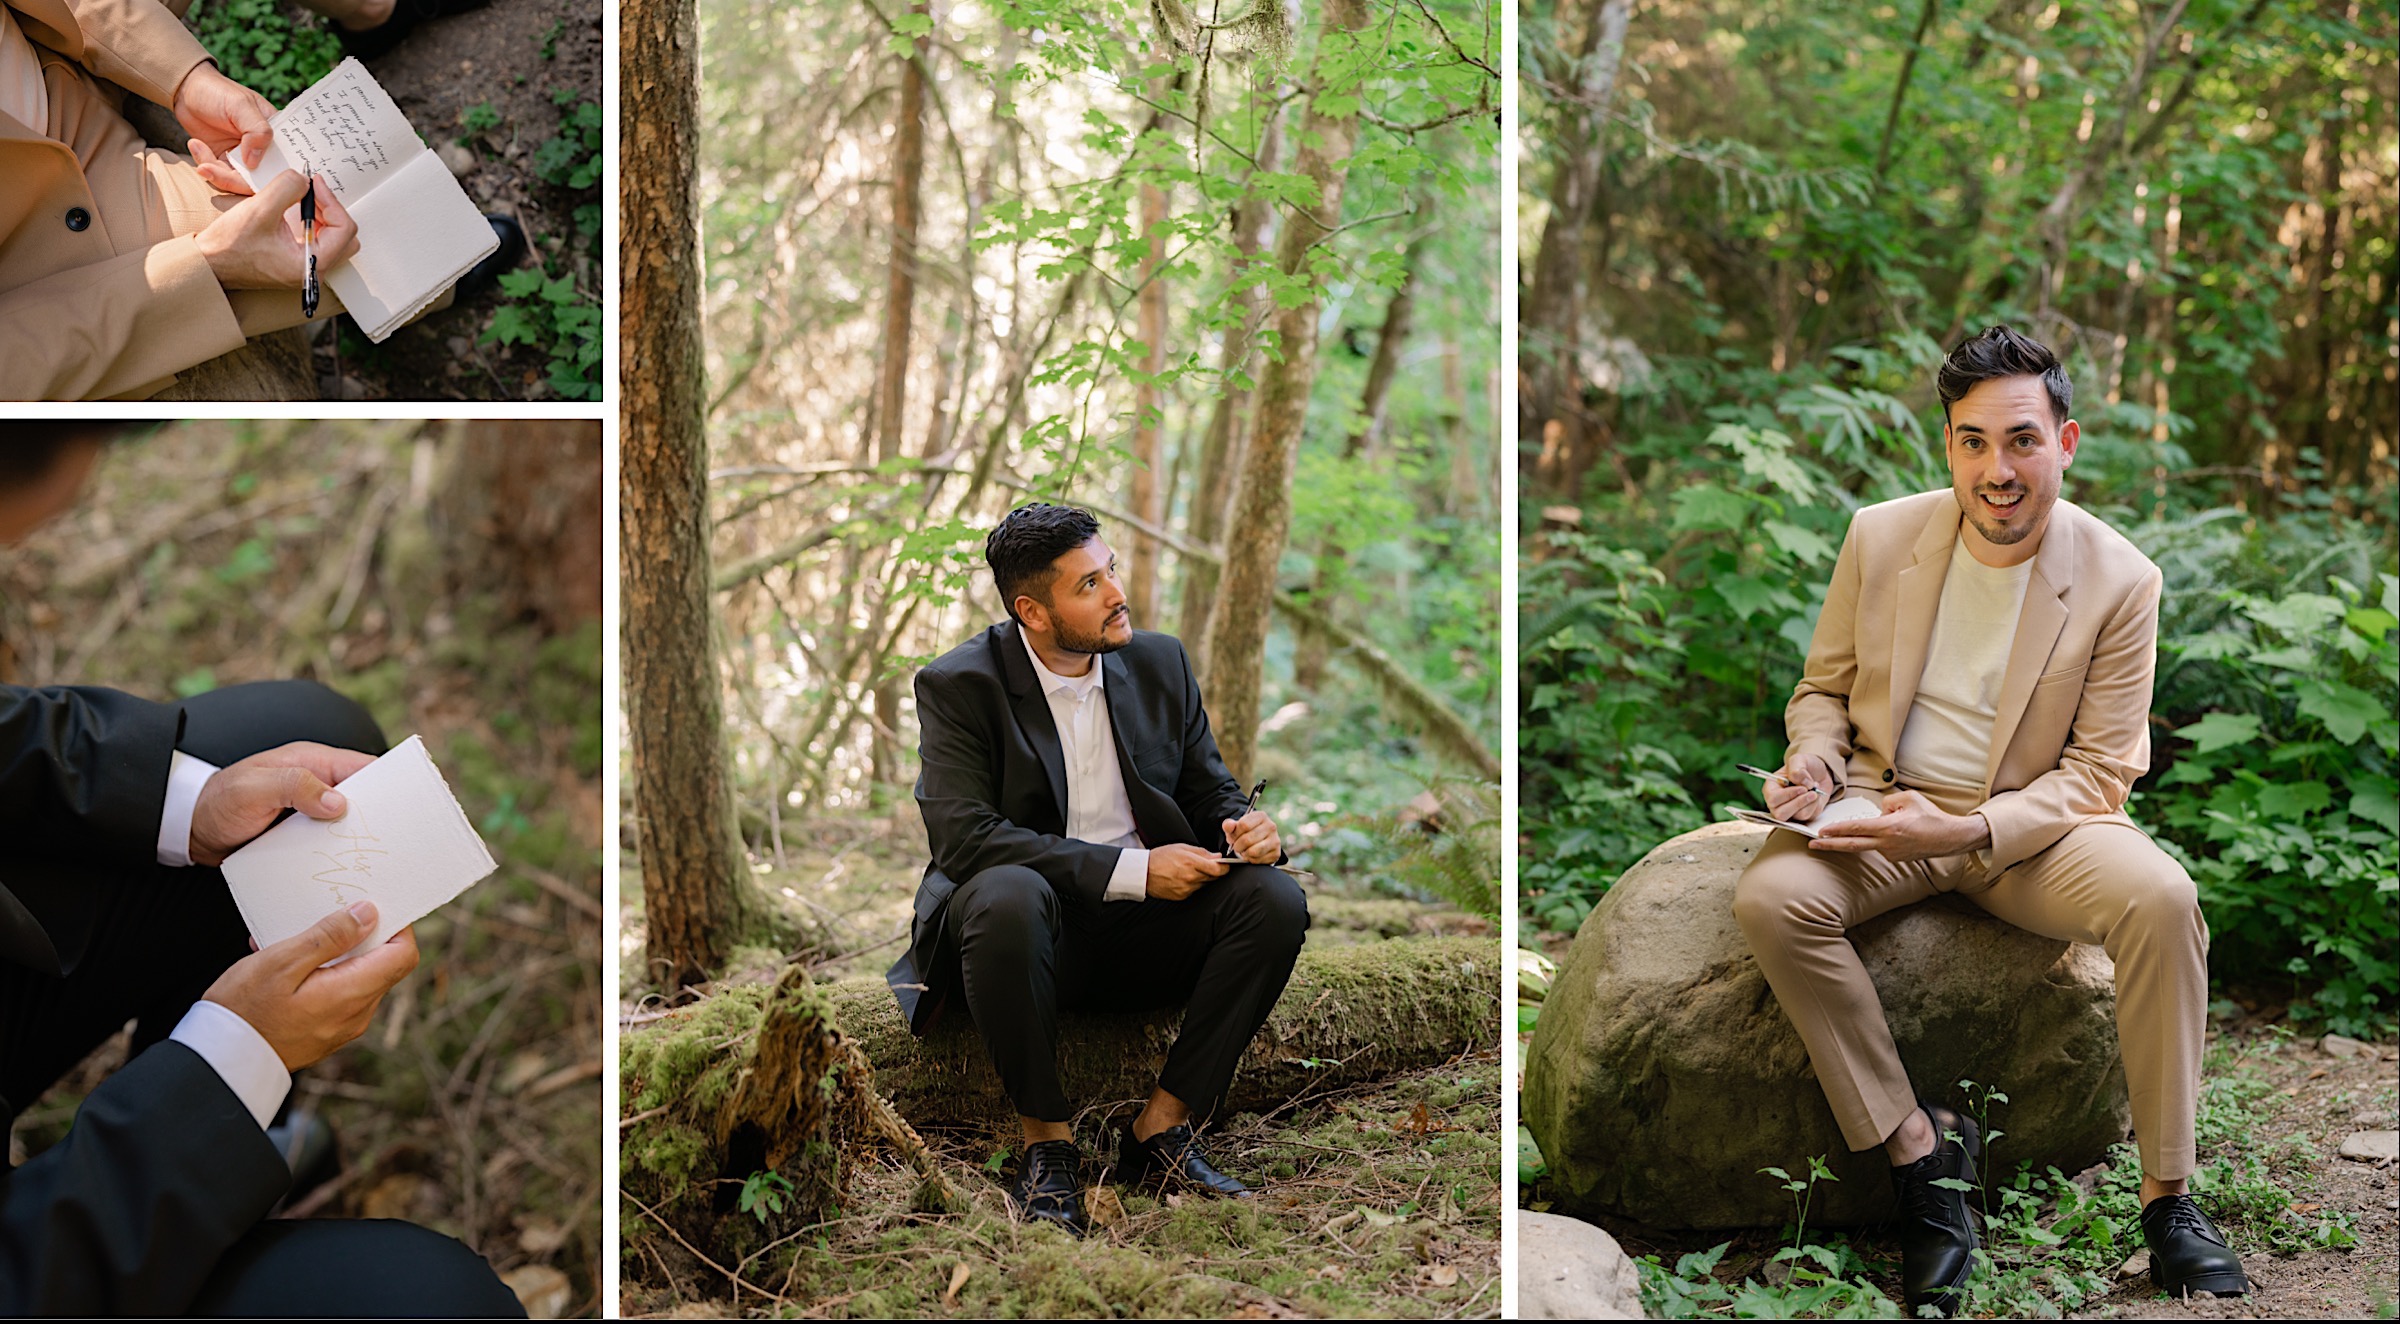 gay-wedding-writing-vows-north-cascades-forest-his-vows